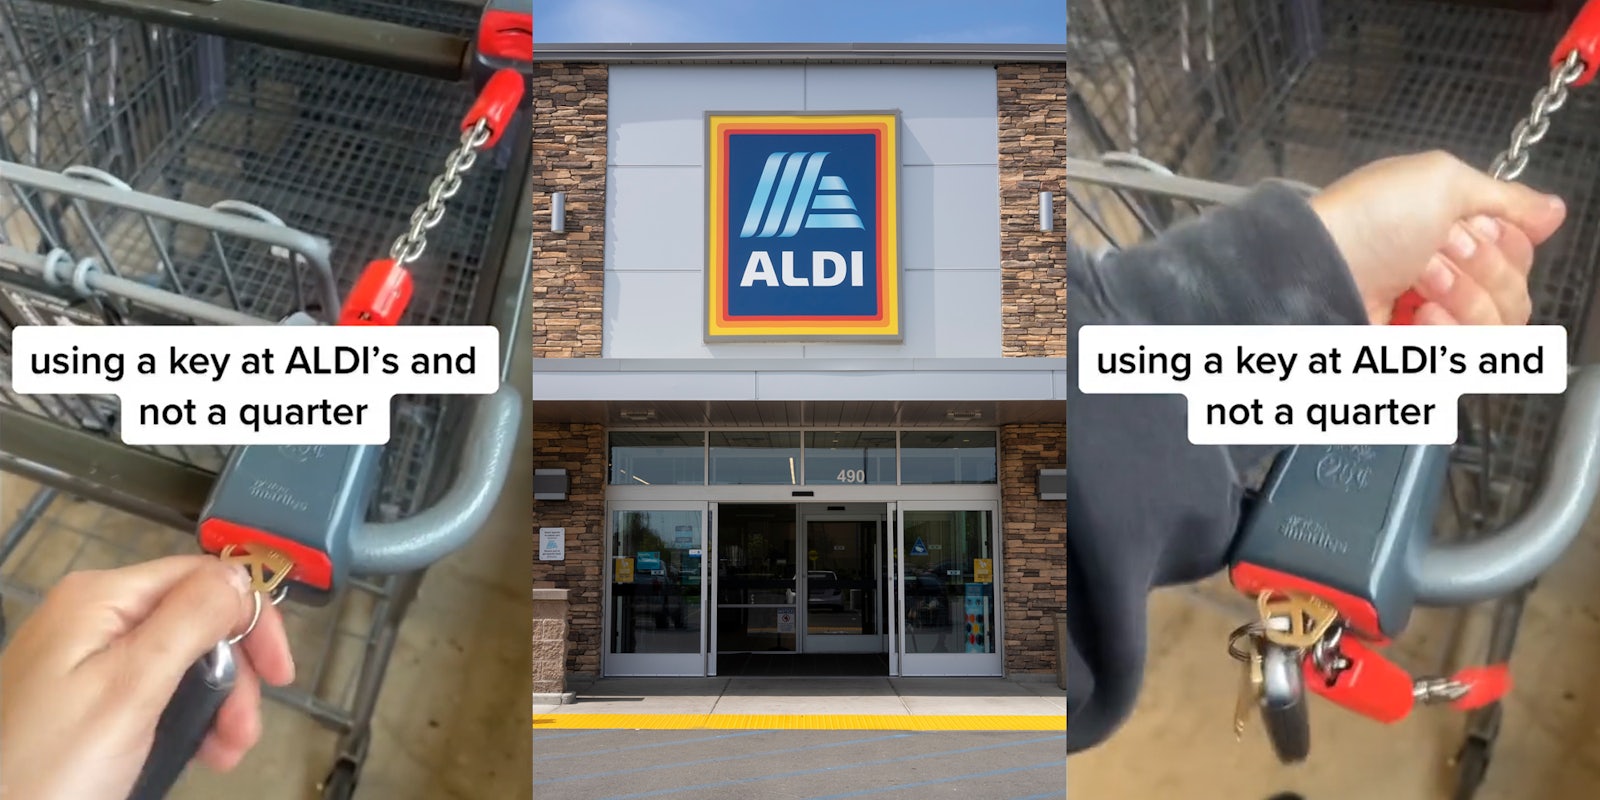 woman trying to pull house key of of ALDI's shopping cart with caption 'using a key at ALDI's and not a quarter' (l) ALDI's building with sign (c) woman trying to pull house key of of ALDI's shopping cart with caption 'using a key at ALDI's and not a quarter' (r)